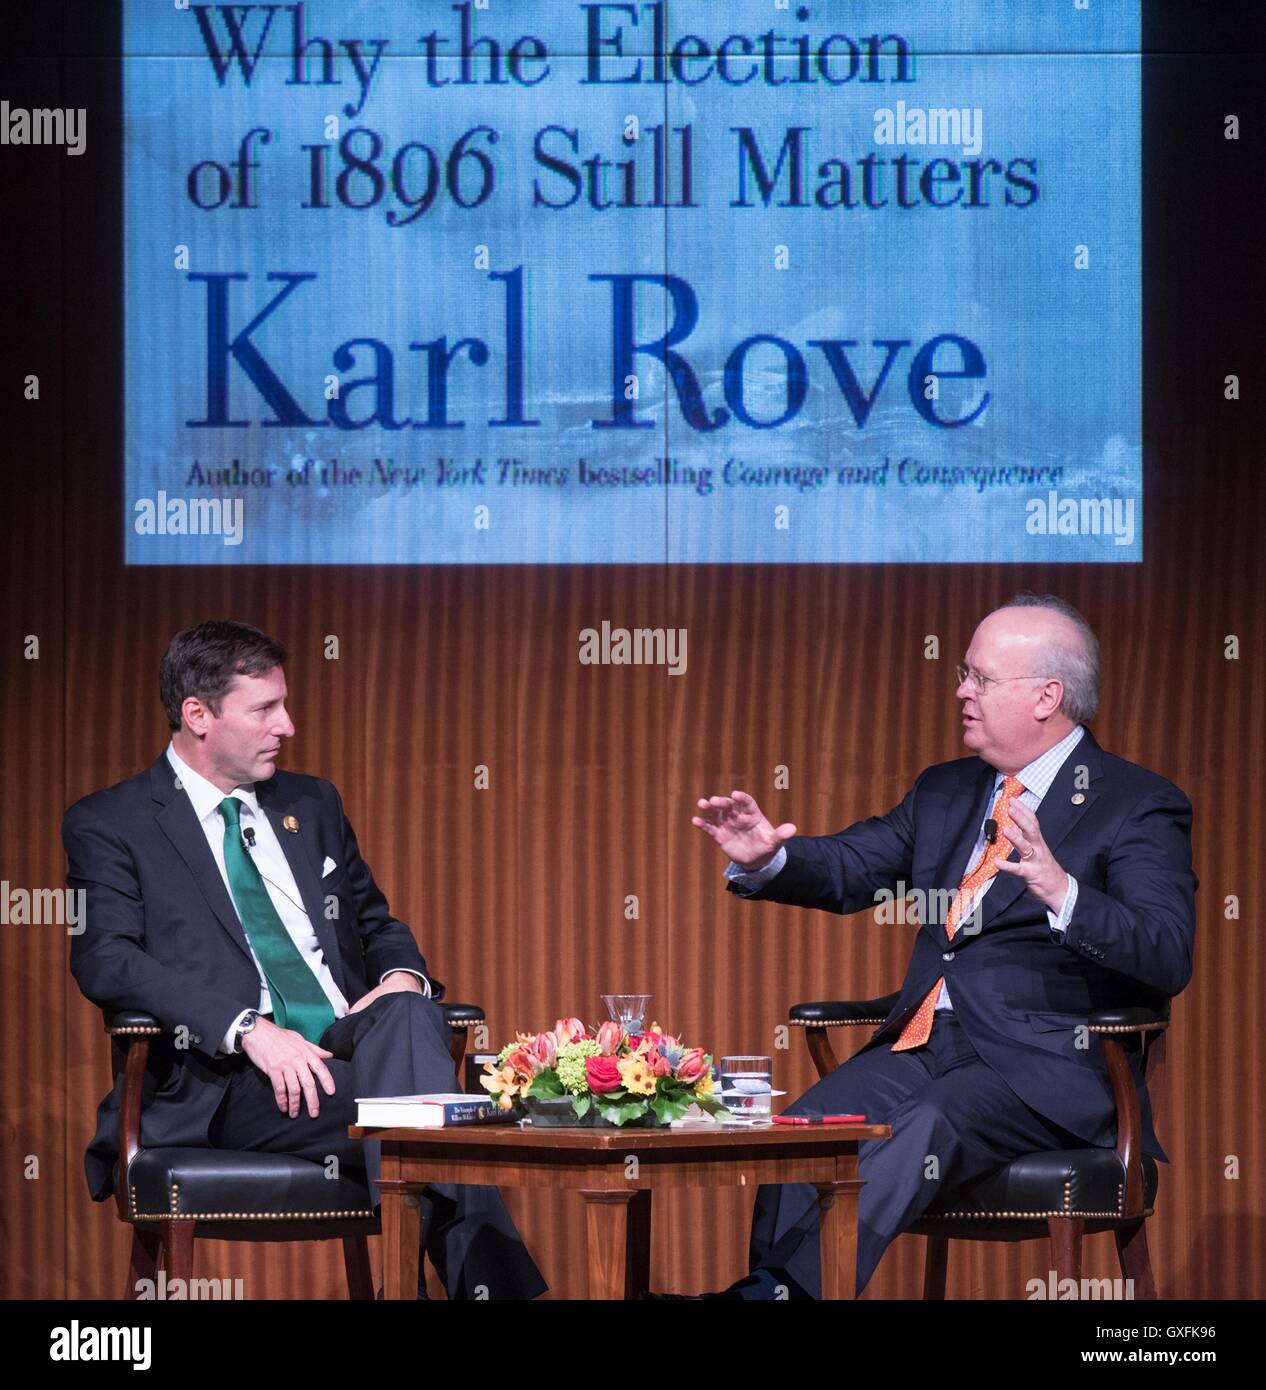 GOP political consultant Karl Rove discusses his forthcoming book with library director Mark Updegrove (left) during the Texas Book Festival at the LBJ Presidential Library December 1, 2015 in Austin, Texas. Jay Godwin. Stock Photo